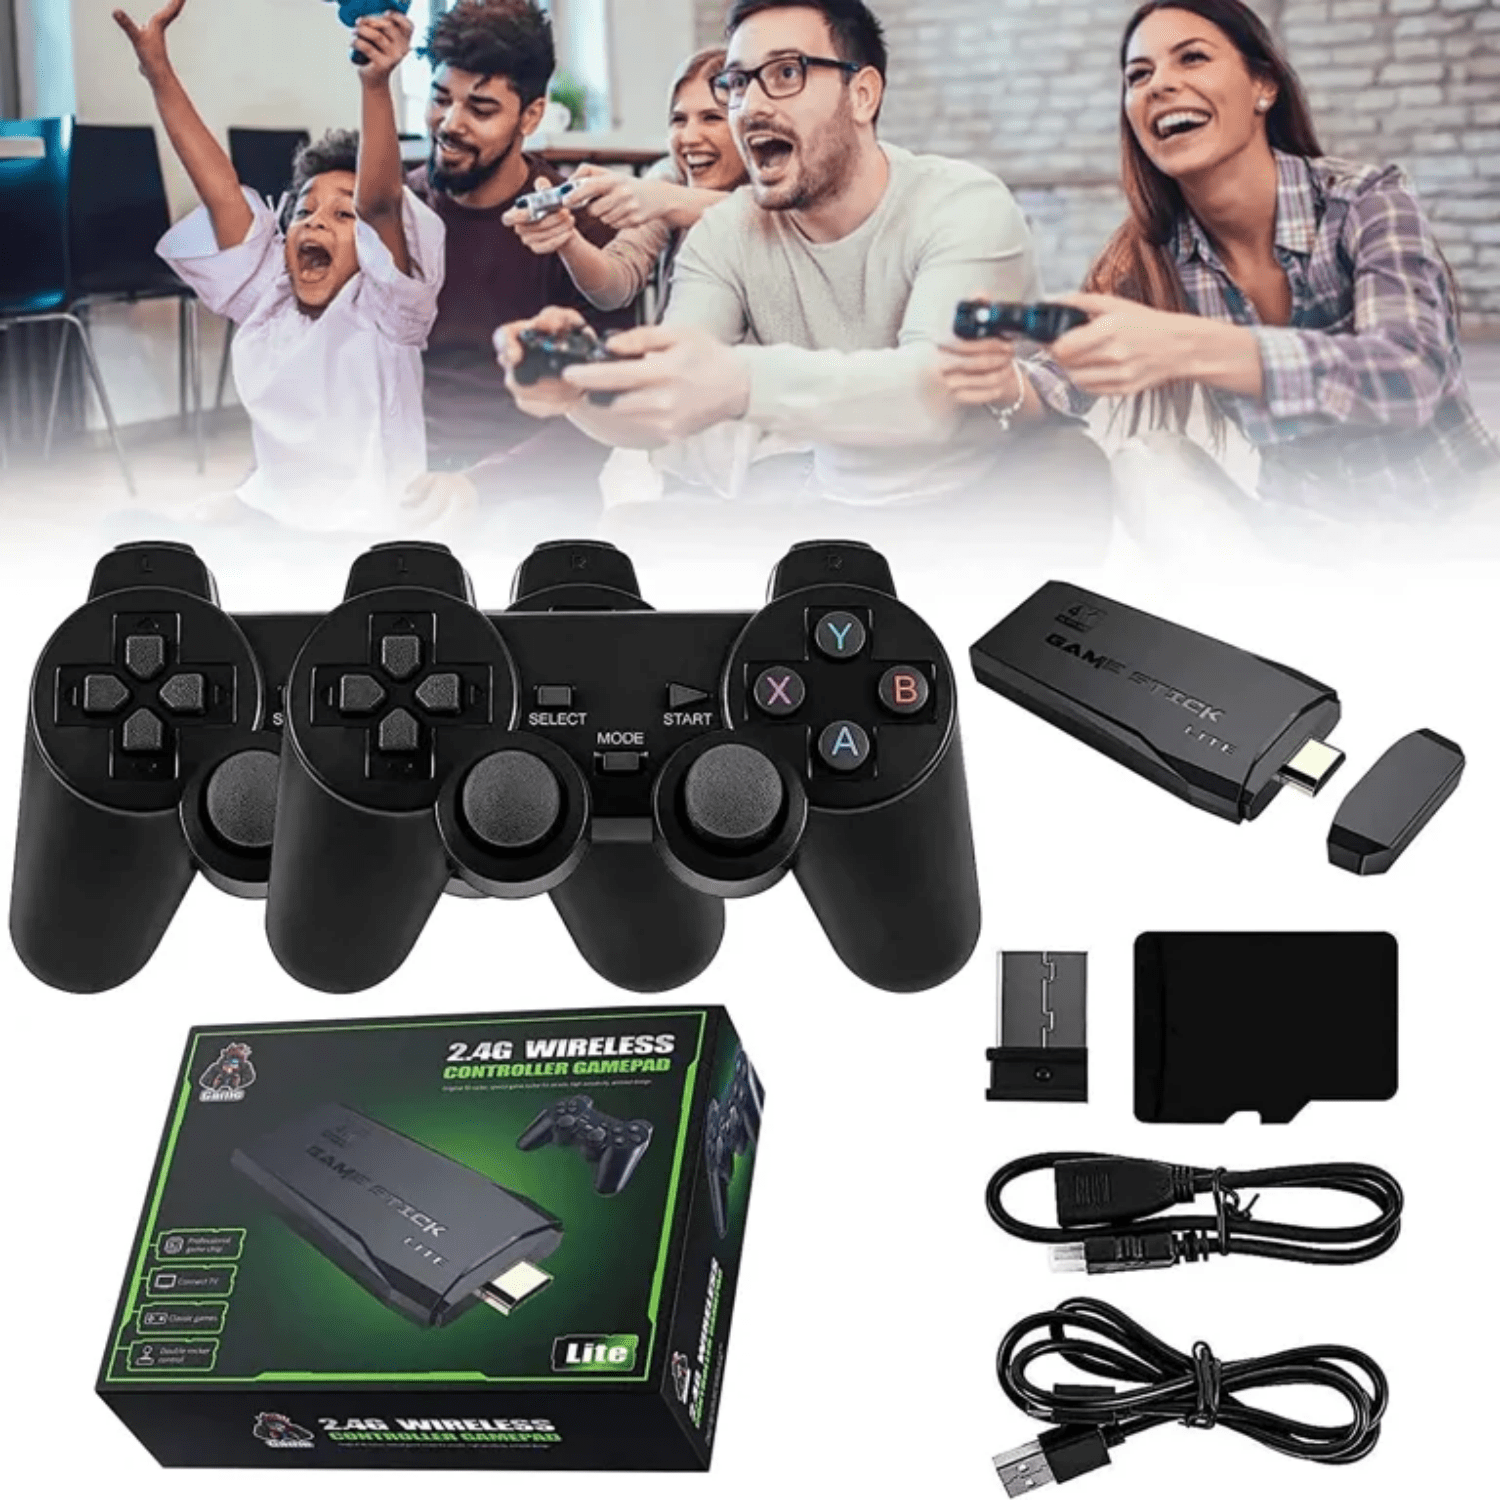 Game Stick 4K 10000 Game X8 Original Support 14 Simuators Dual system For  Android TV Box with WiFi Retro Video Game Consoles